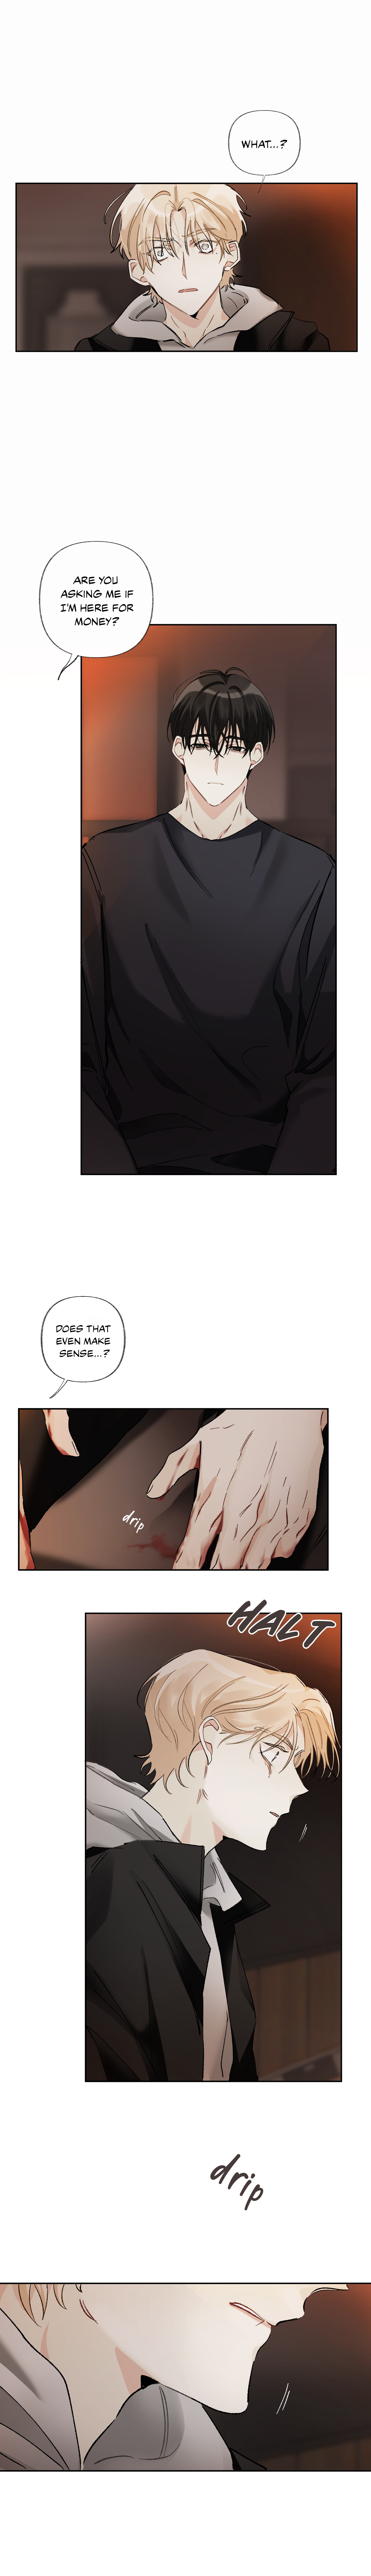 The World Without You - Page 3